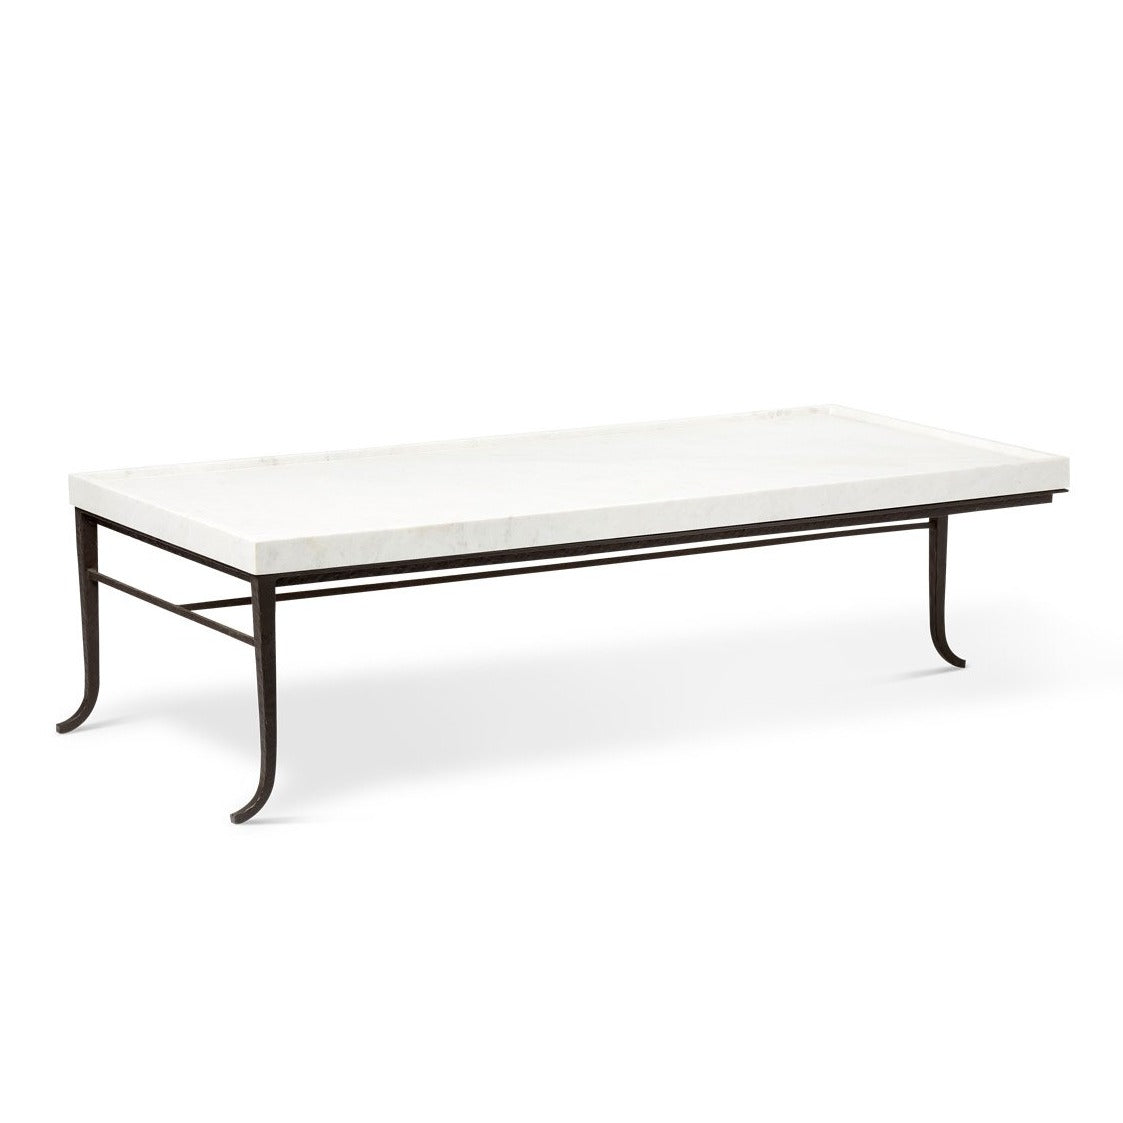 Kerylos Marble and Iron Coffee Table